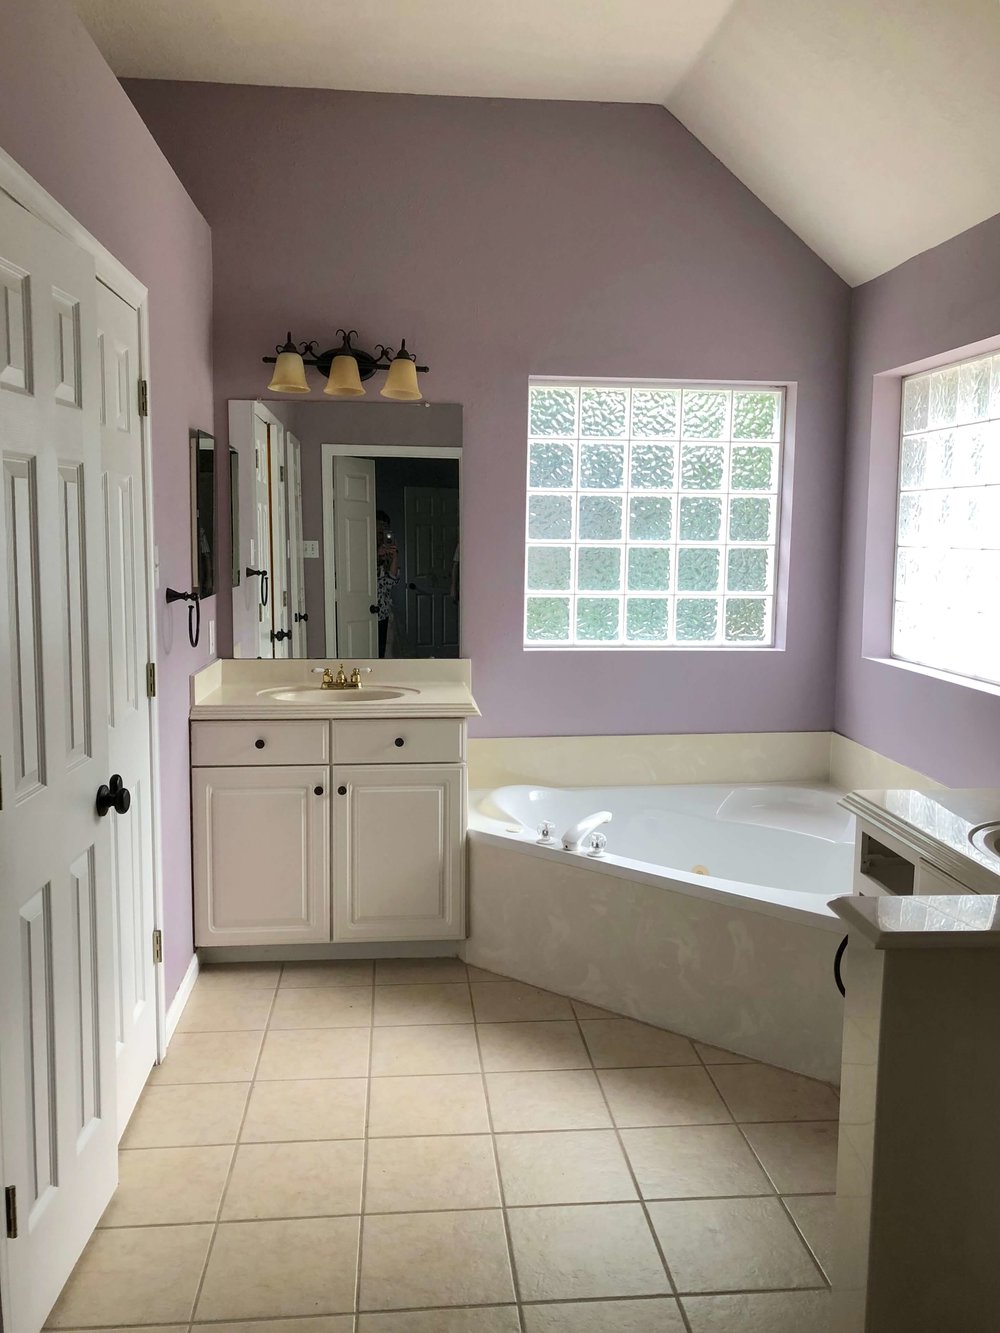 Remodeling A Master Bathroom Consider These Layout Guidelines